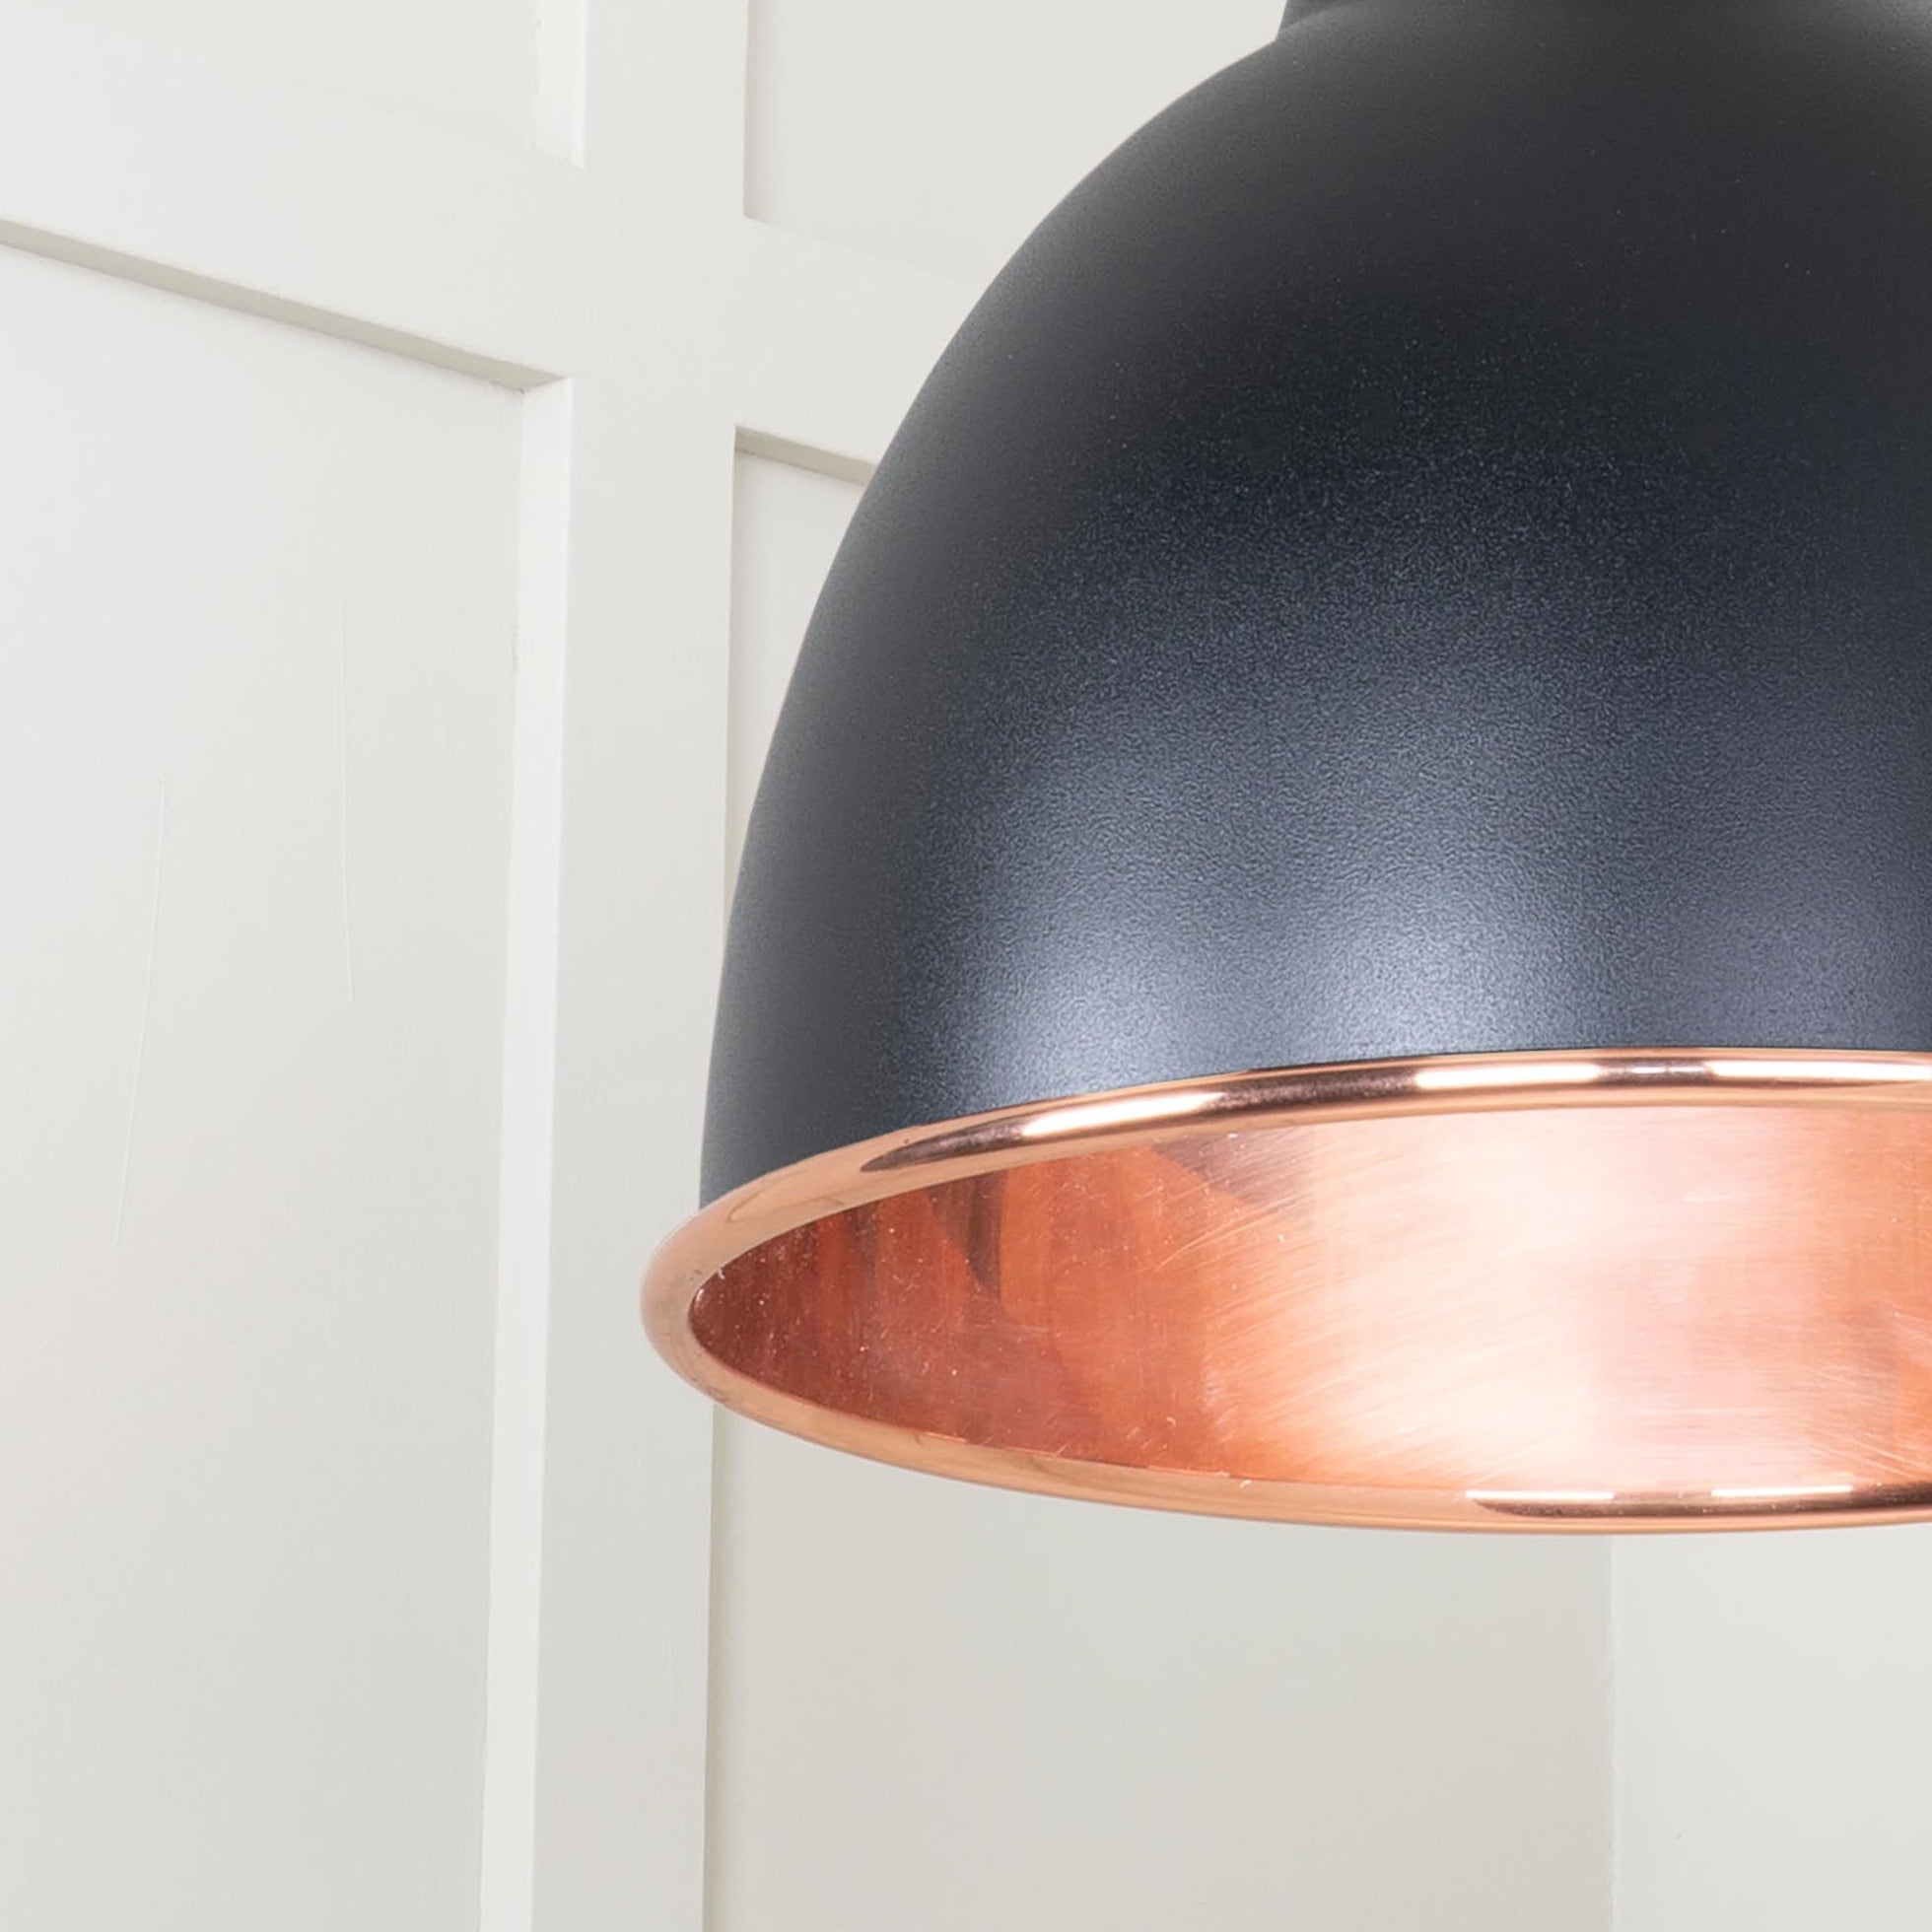  SHOW Close Up Image of Brindley Cluster Light in Elan Black in Smooth Copper